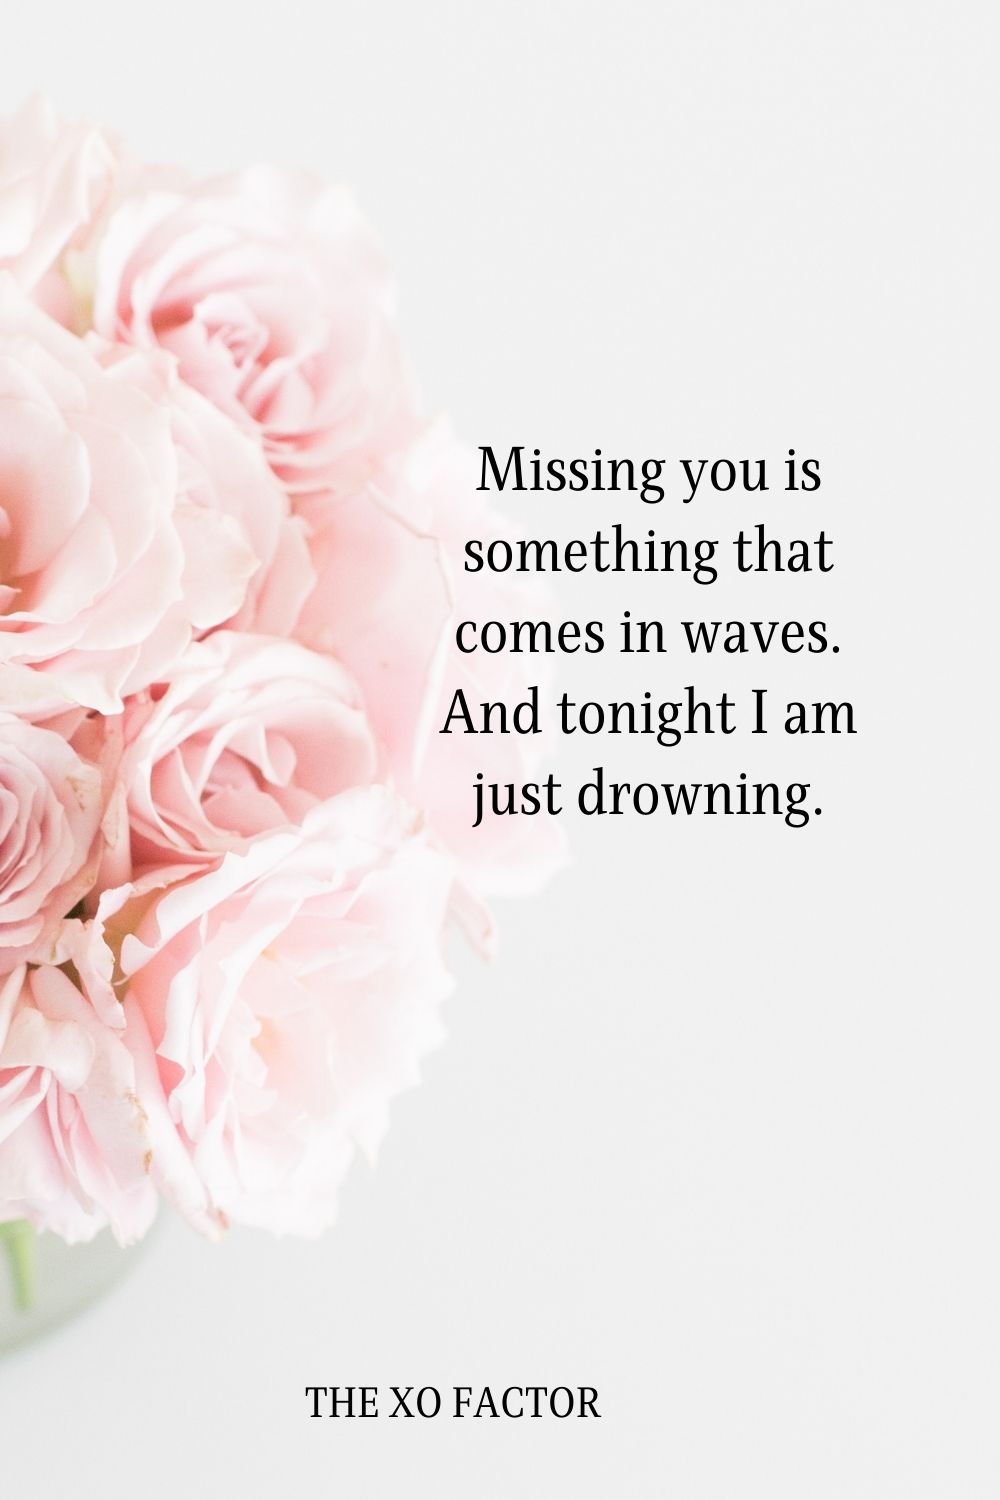 Missing you is something that comes in waves. And tonight I am just drowning.